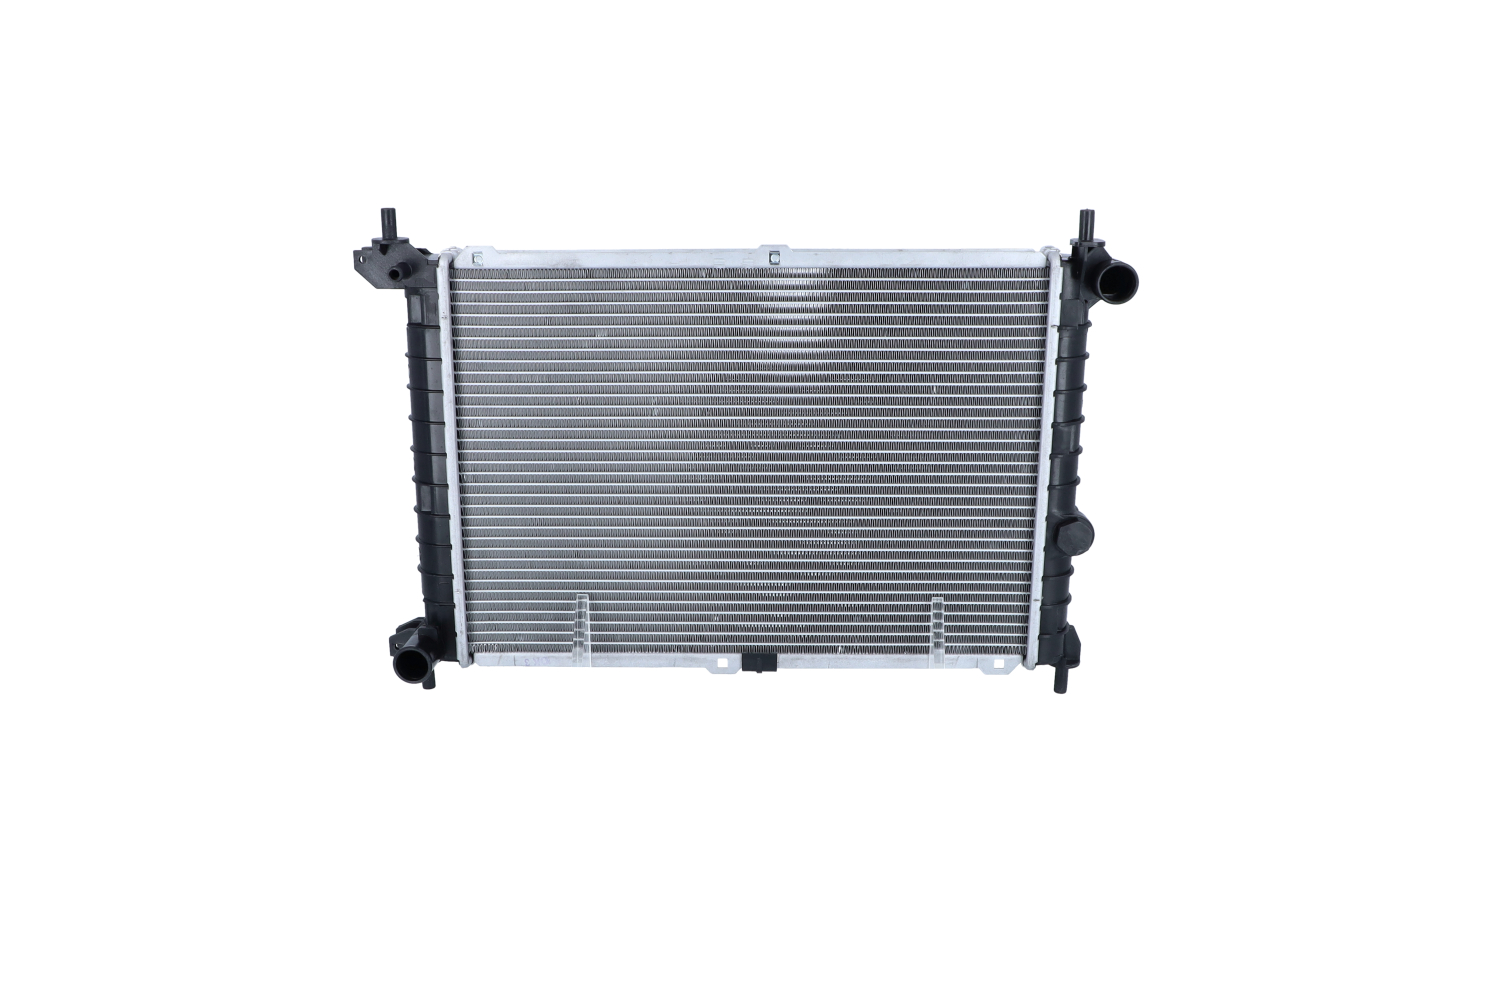 NRF 52142 Engine radiator Aluminium, 500 x 346 x 42 mm, with mounting parts, Brazed cooling fins